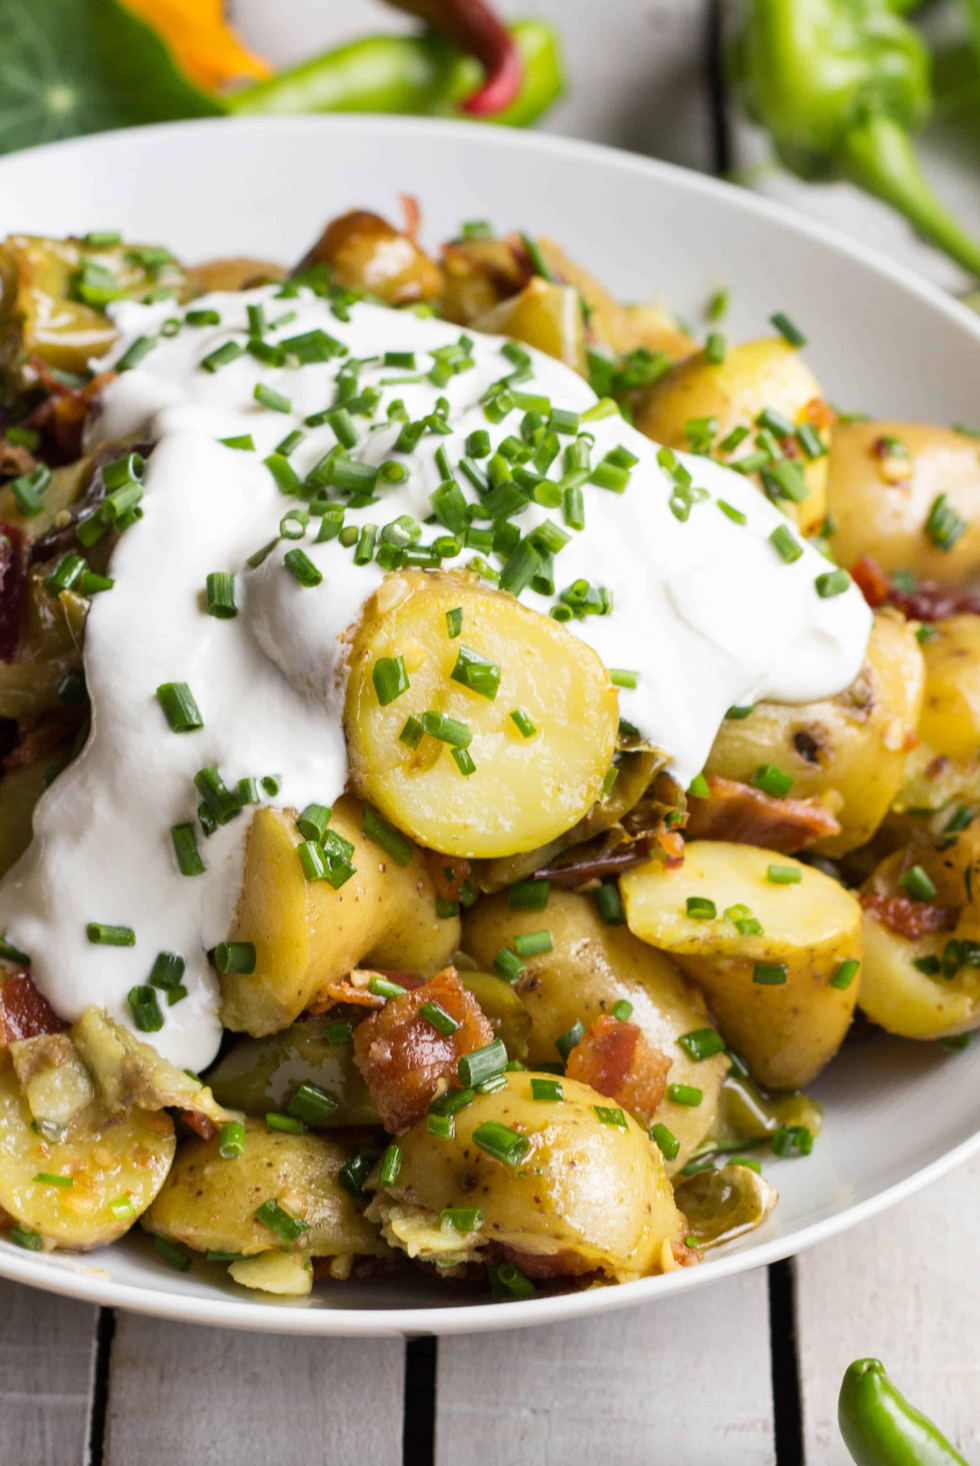 Warm Potato Salad with Bacon and Long Hots